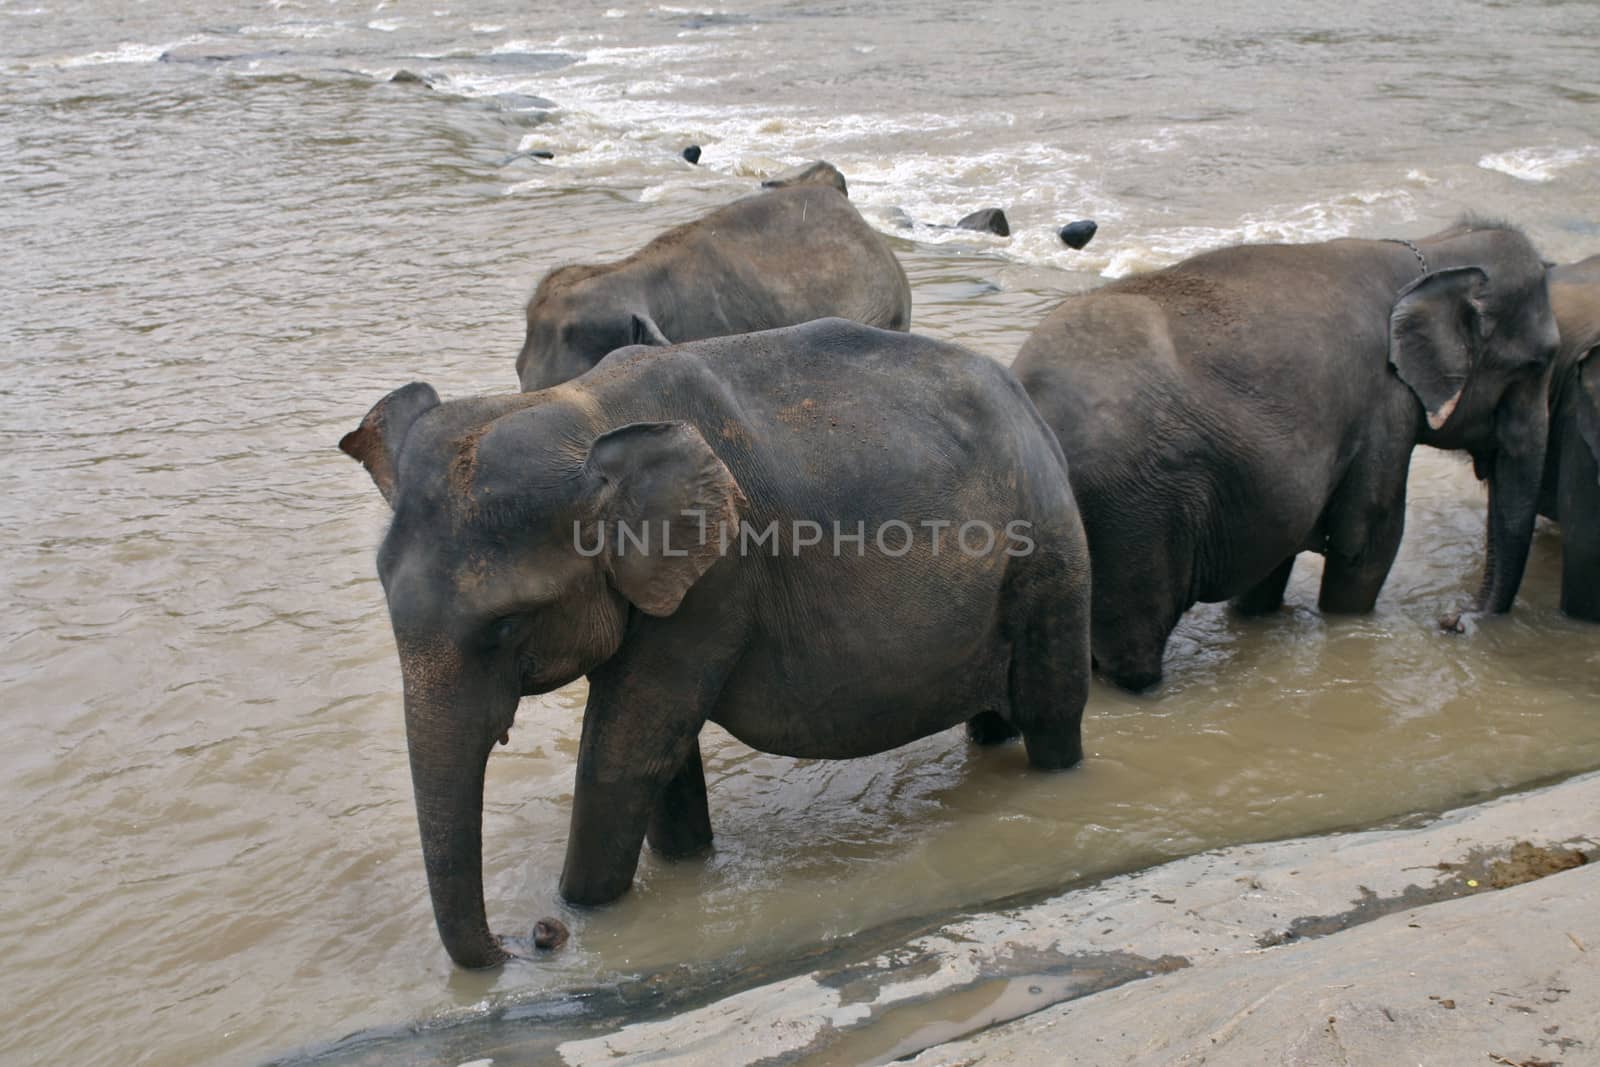 Elephants in the river by haiderazim